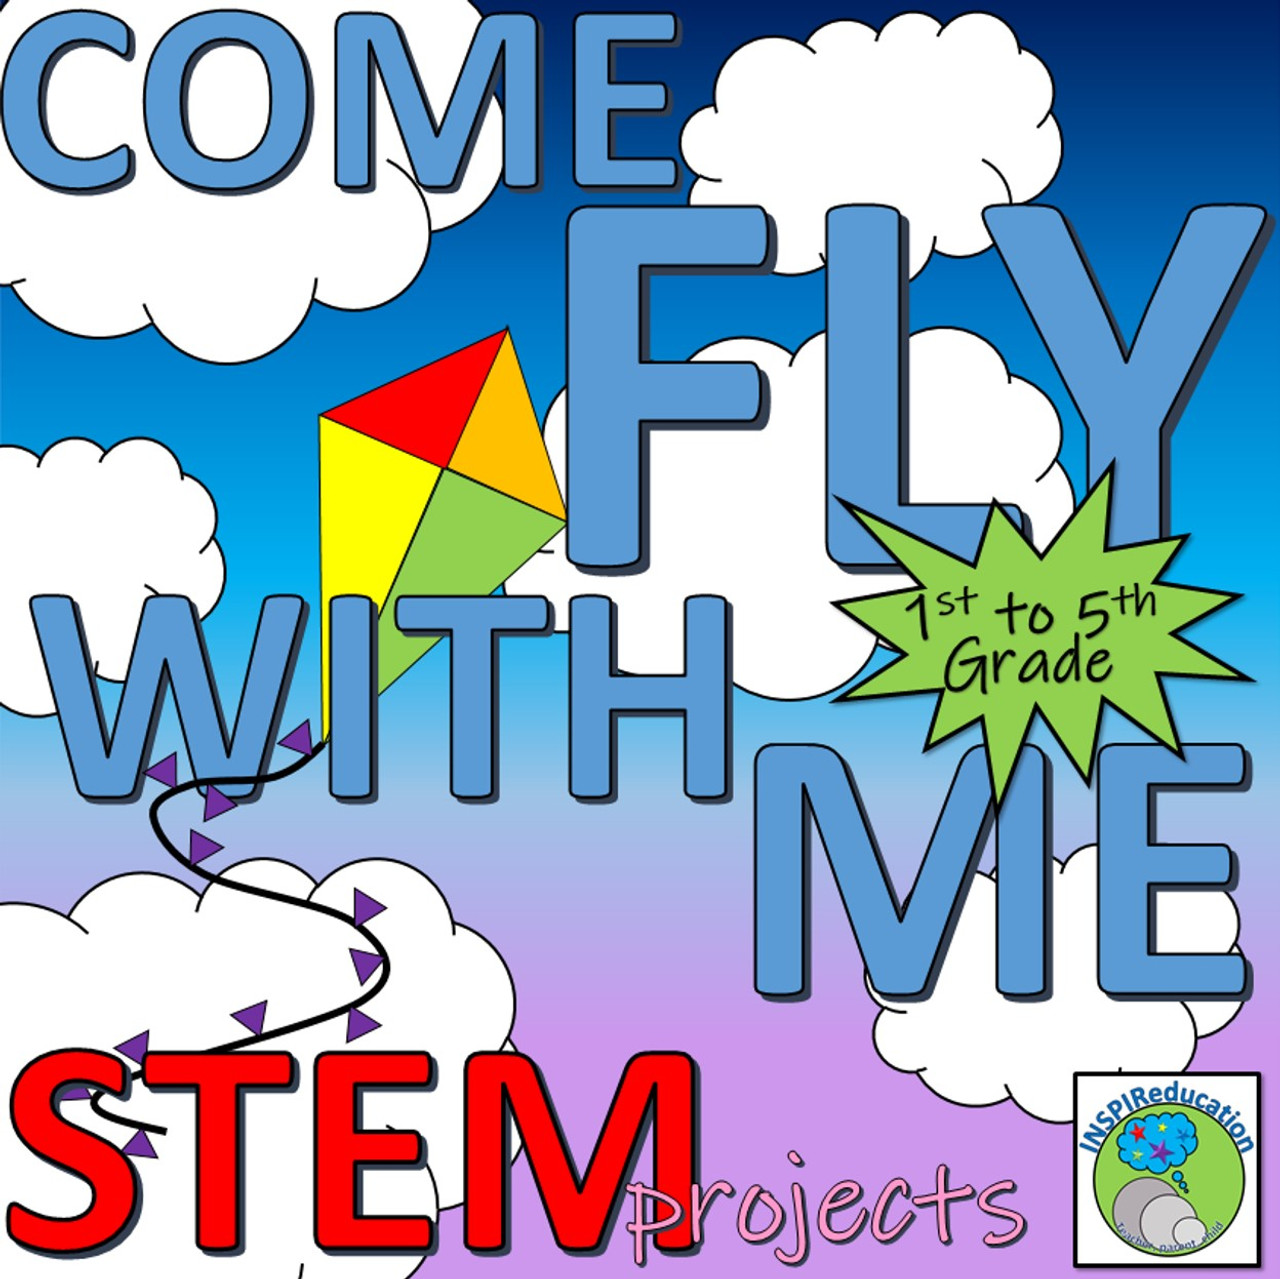 STEM: KITE BUILDING - Structures in Context